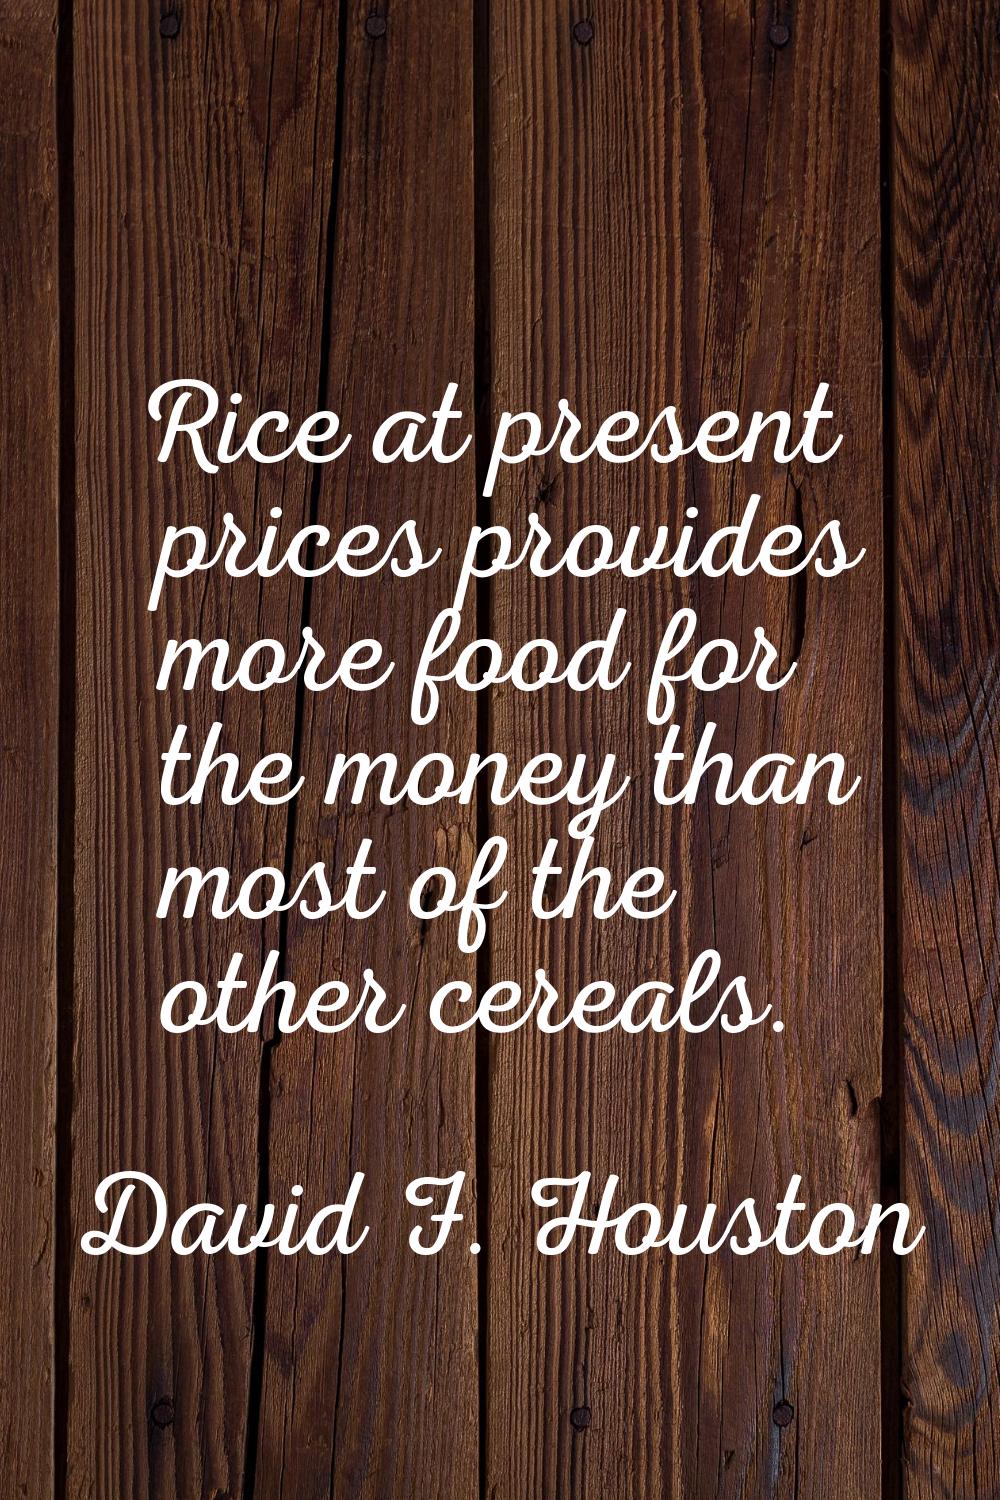 Rice at present prices provides more food for the money than most of the other cereals.